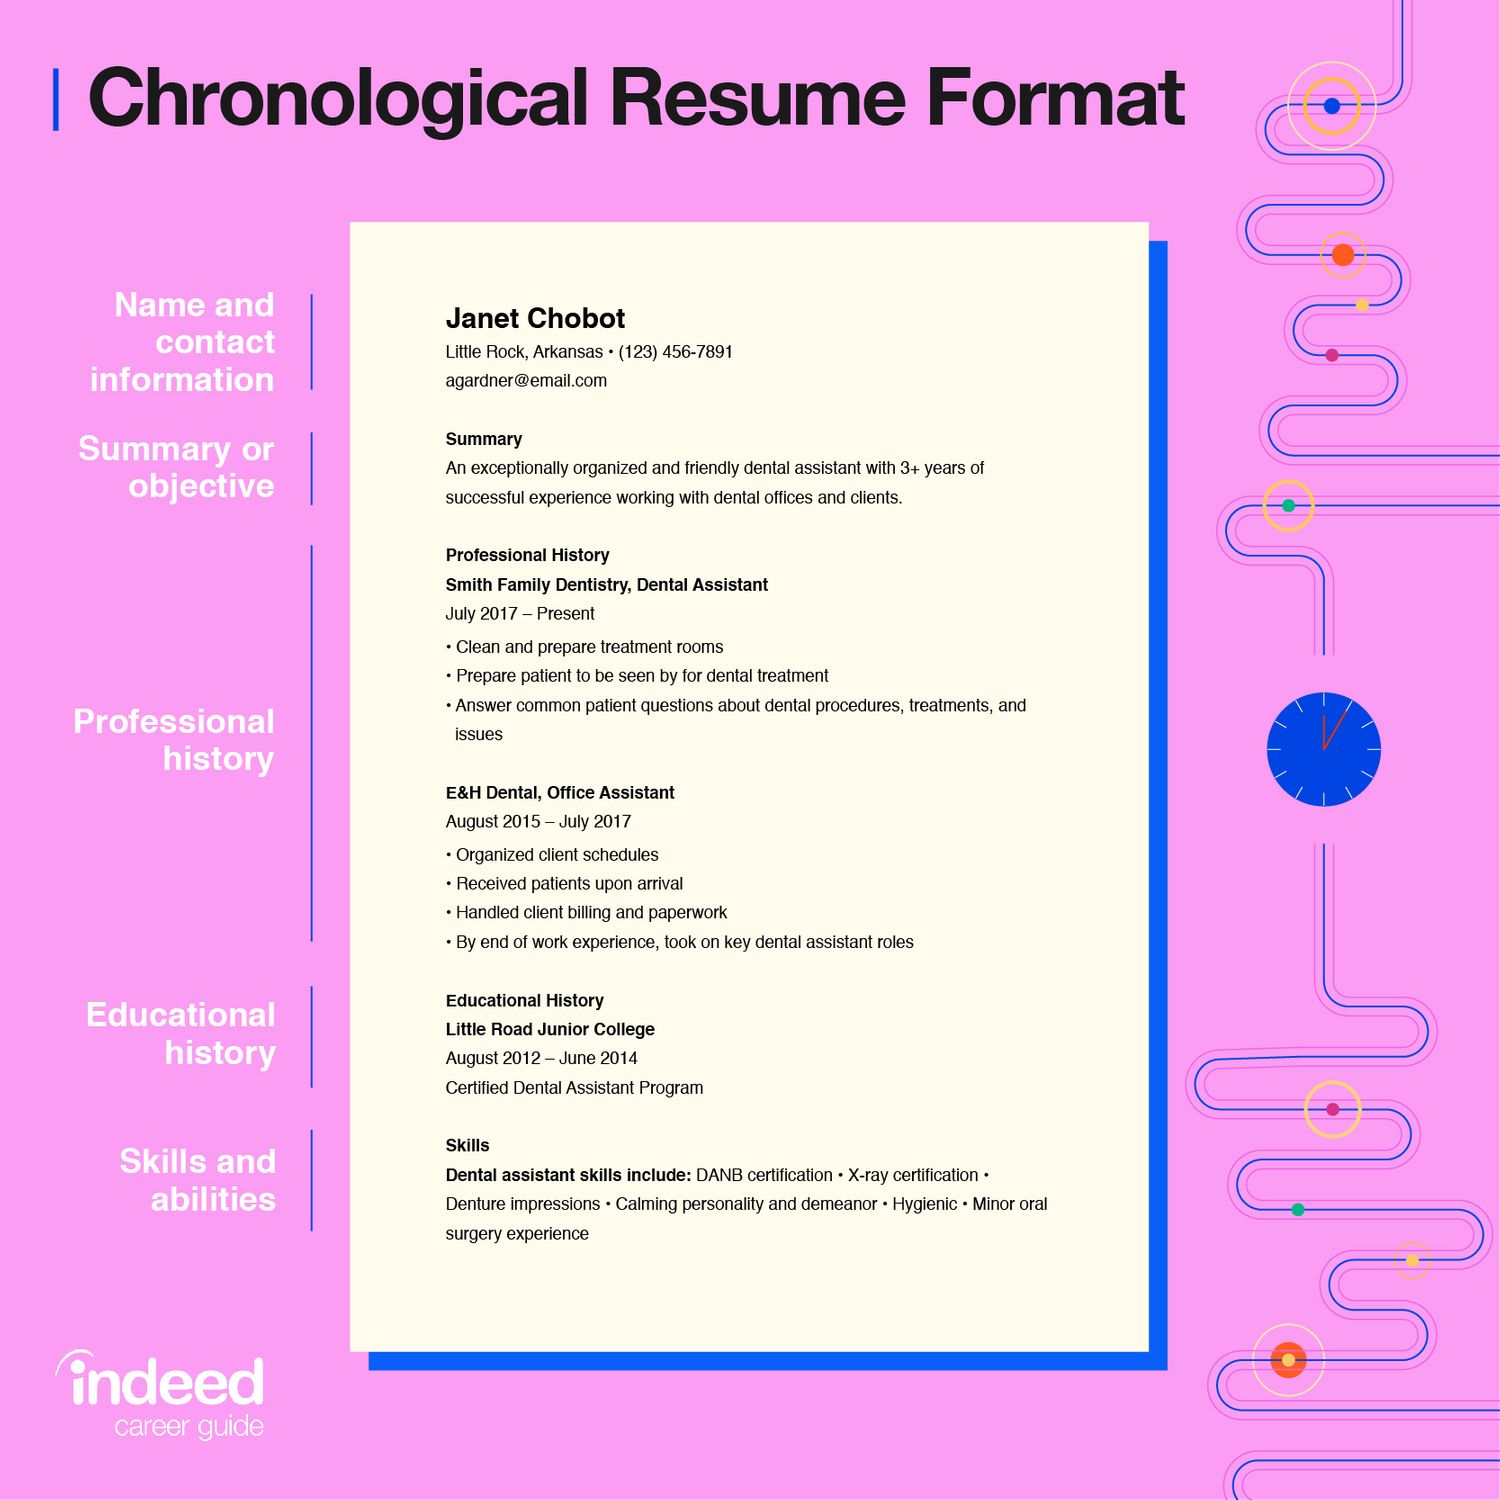 Chronological Resume Tips and Examples